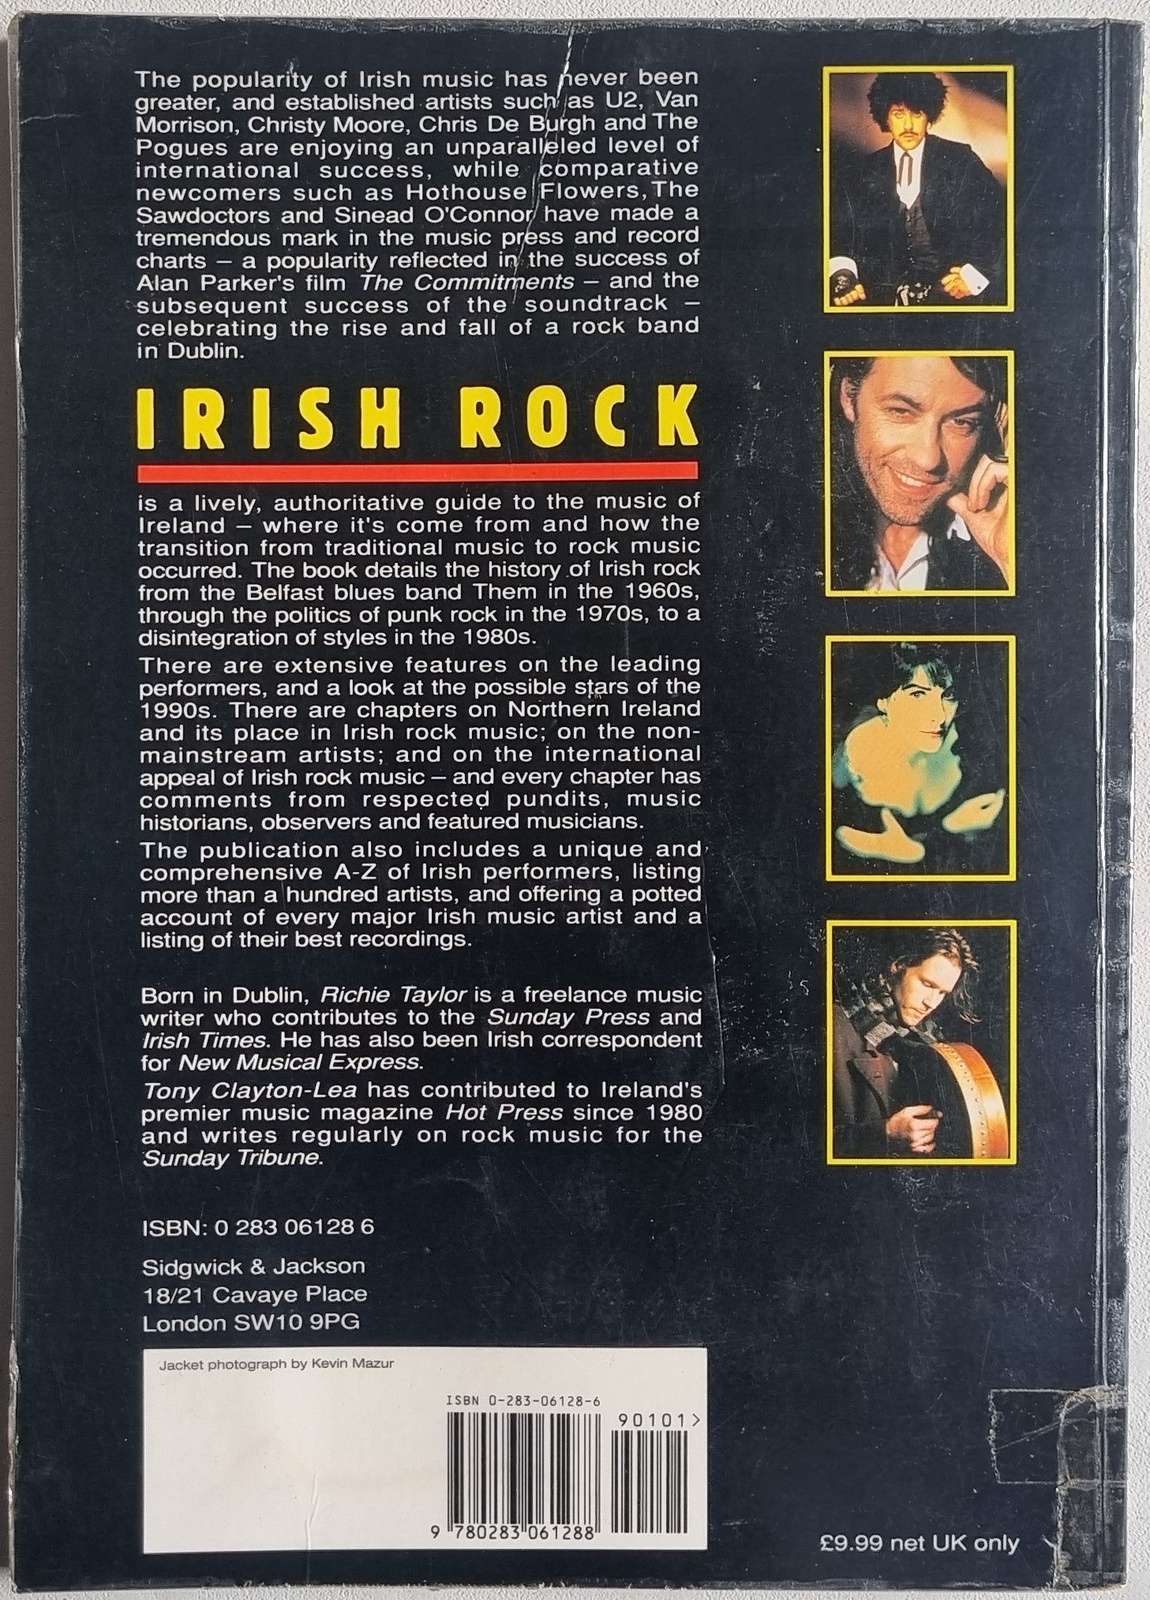 Irish Rock - Where it's Come From and Where it's Going